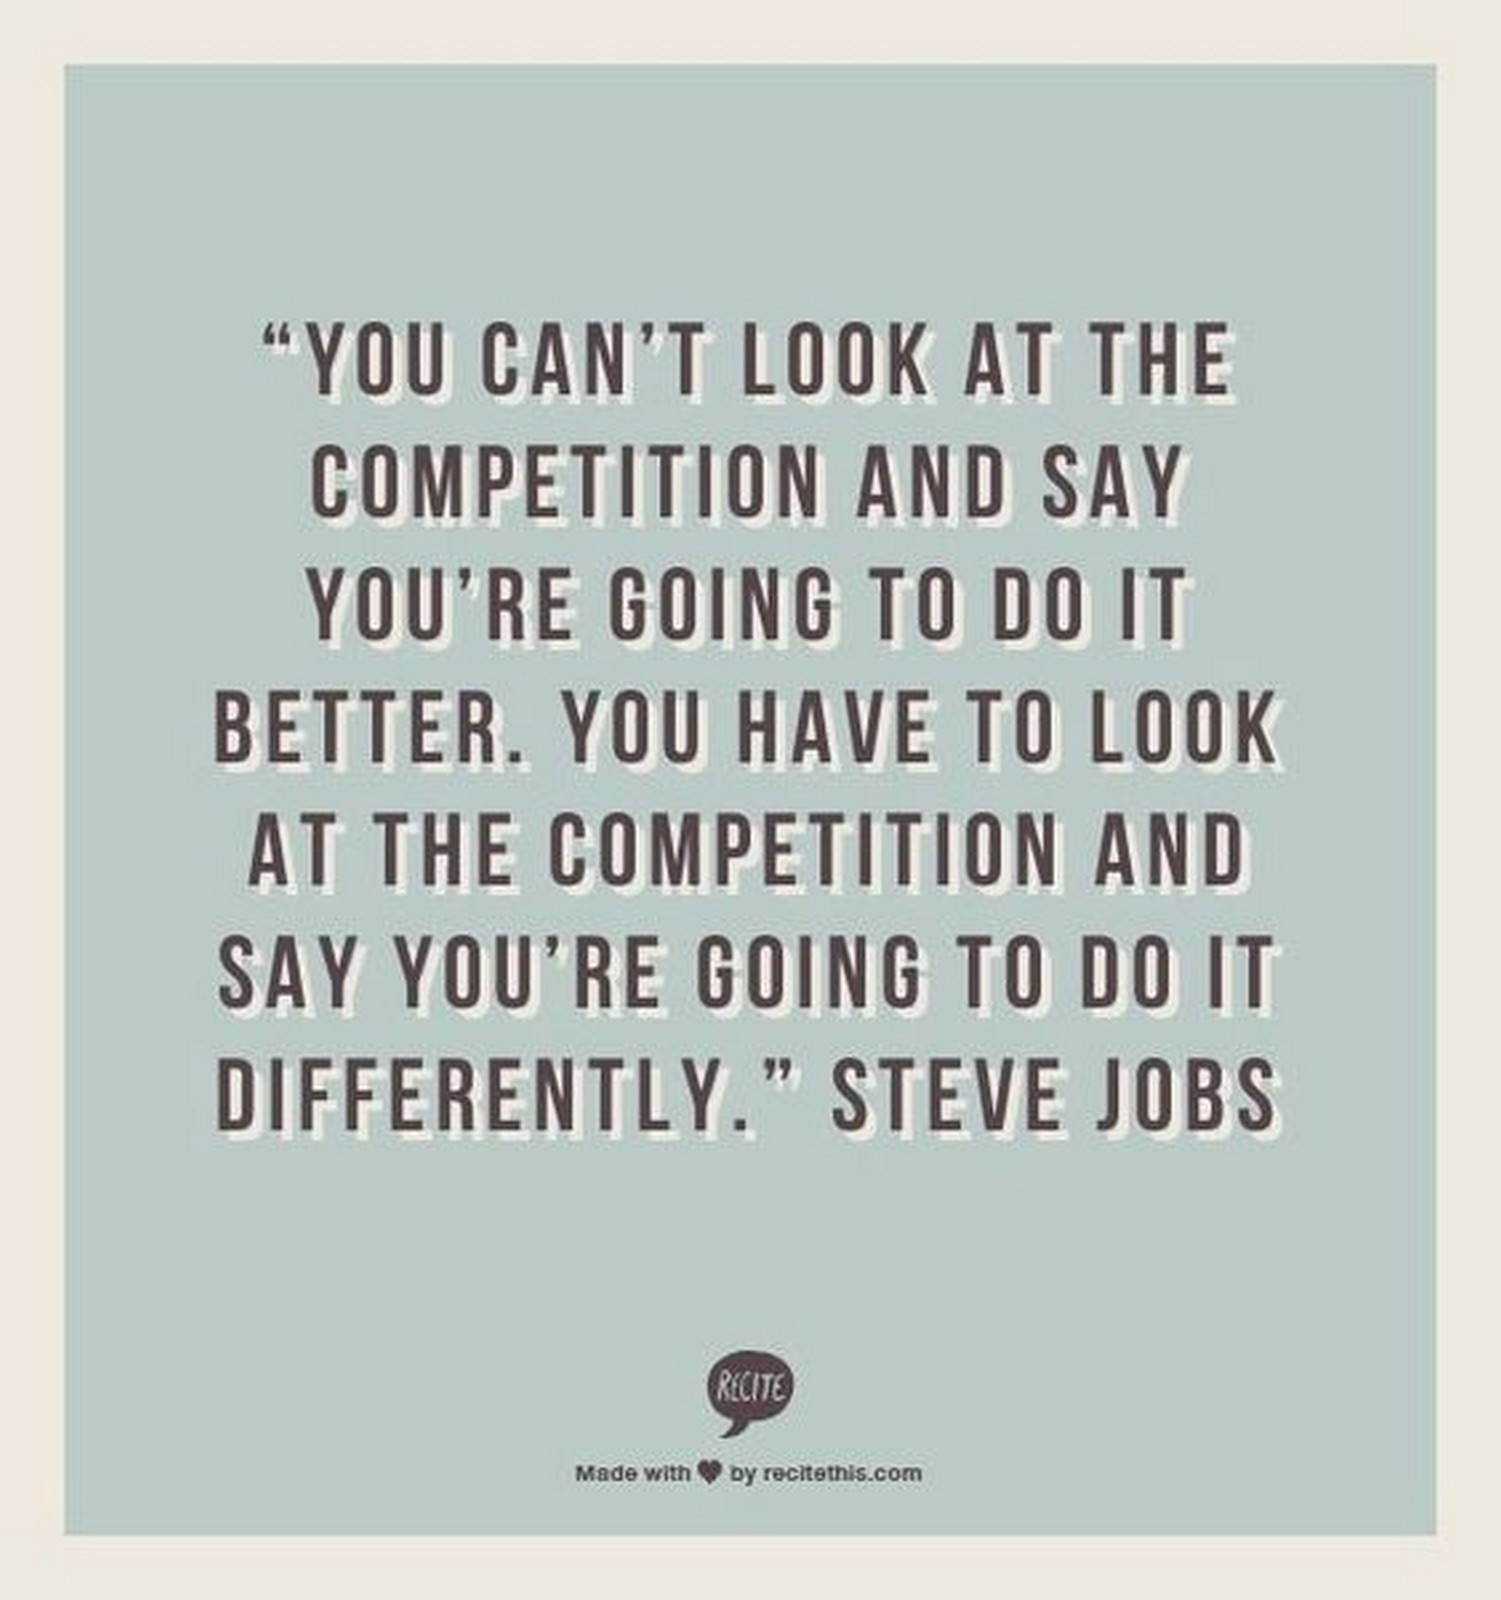 19 Best Steve Jobs Quotes - "You can't look at the competition and say you're going to do it better. You have to look at the competition and say you're going to do it differently."